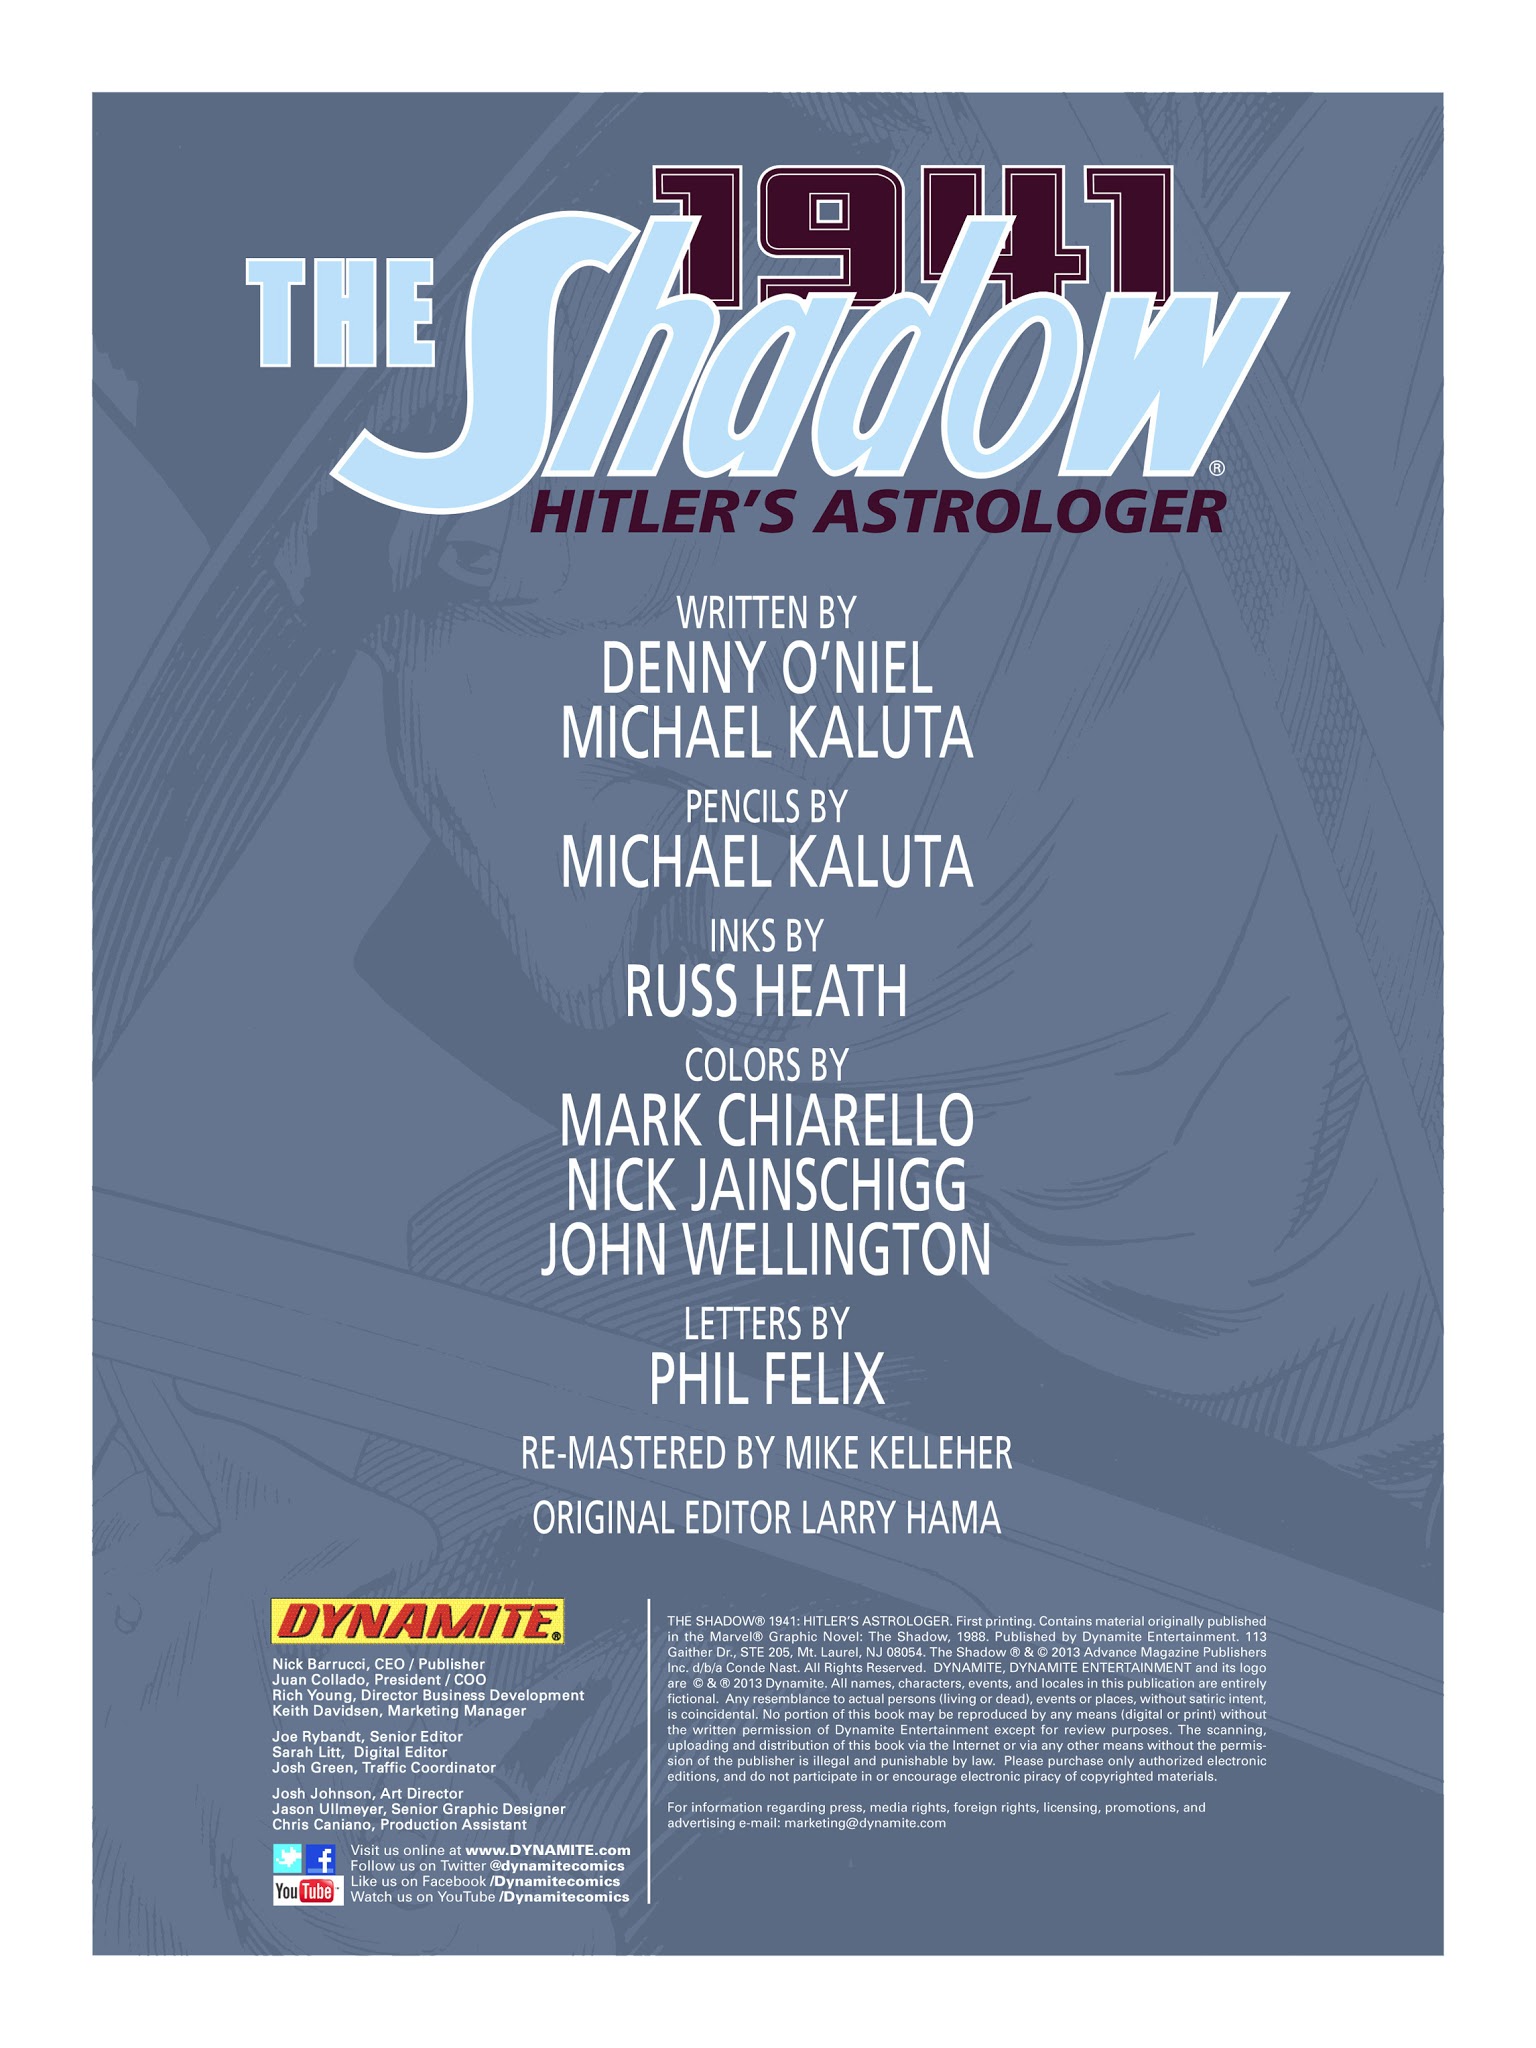 Read online The Shadow 1941: Hitler's Astrologer comic -  Issue # Full - 4